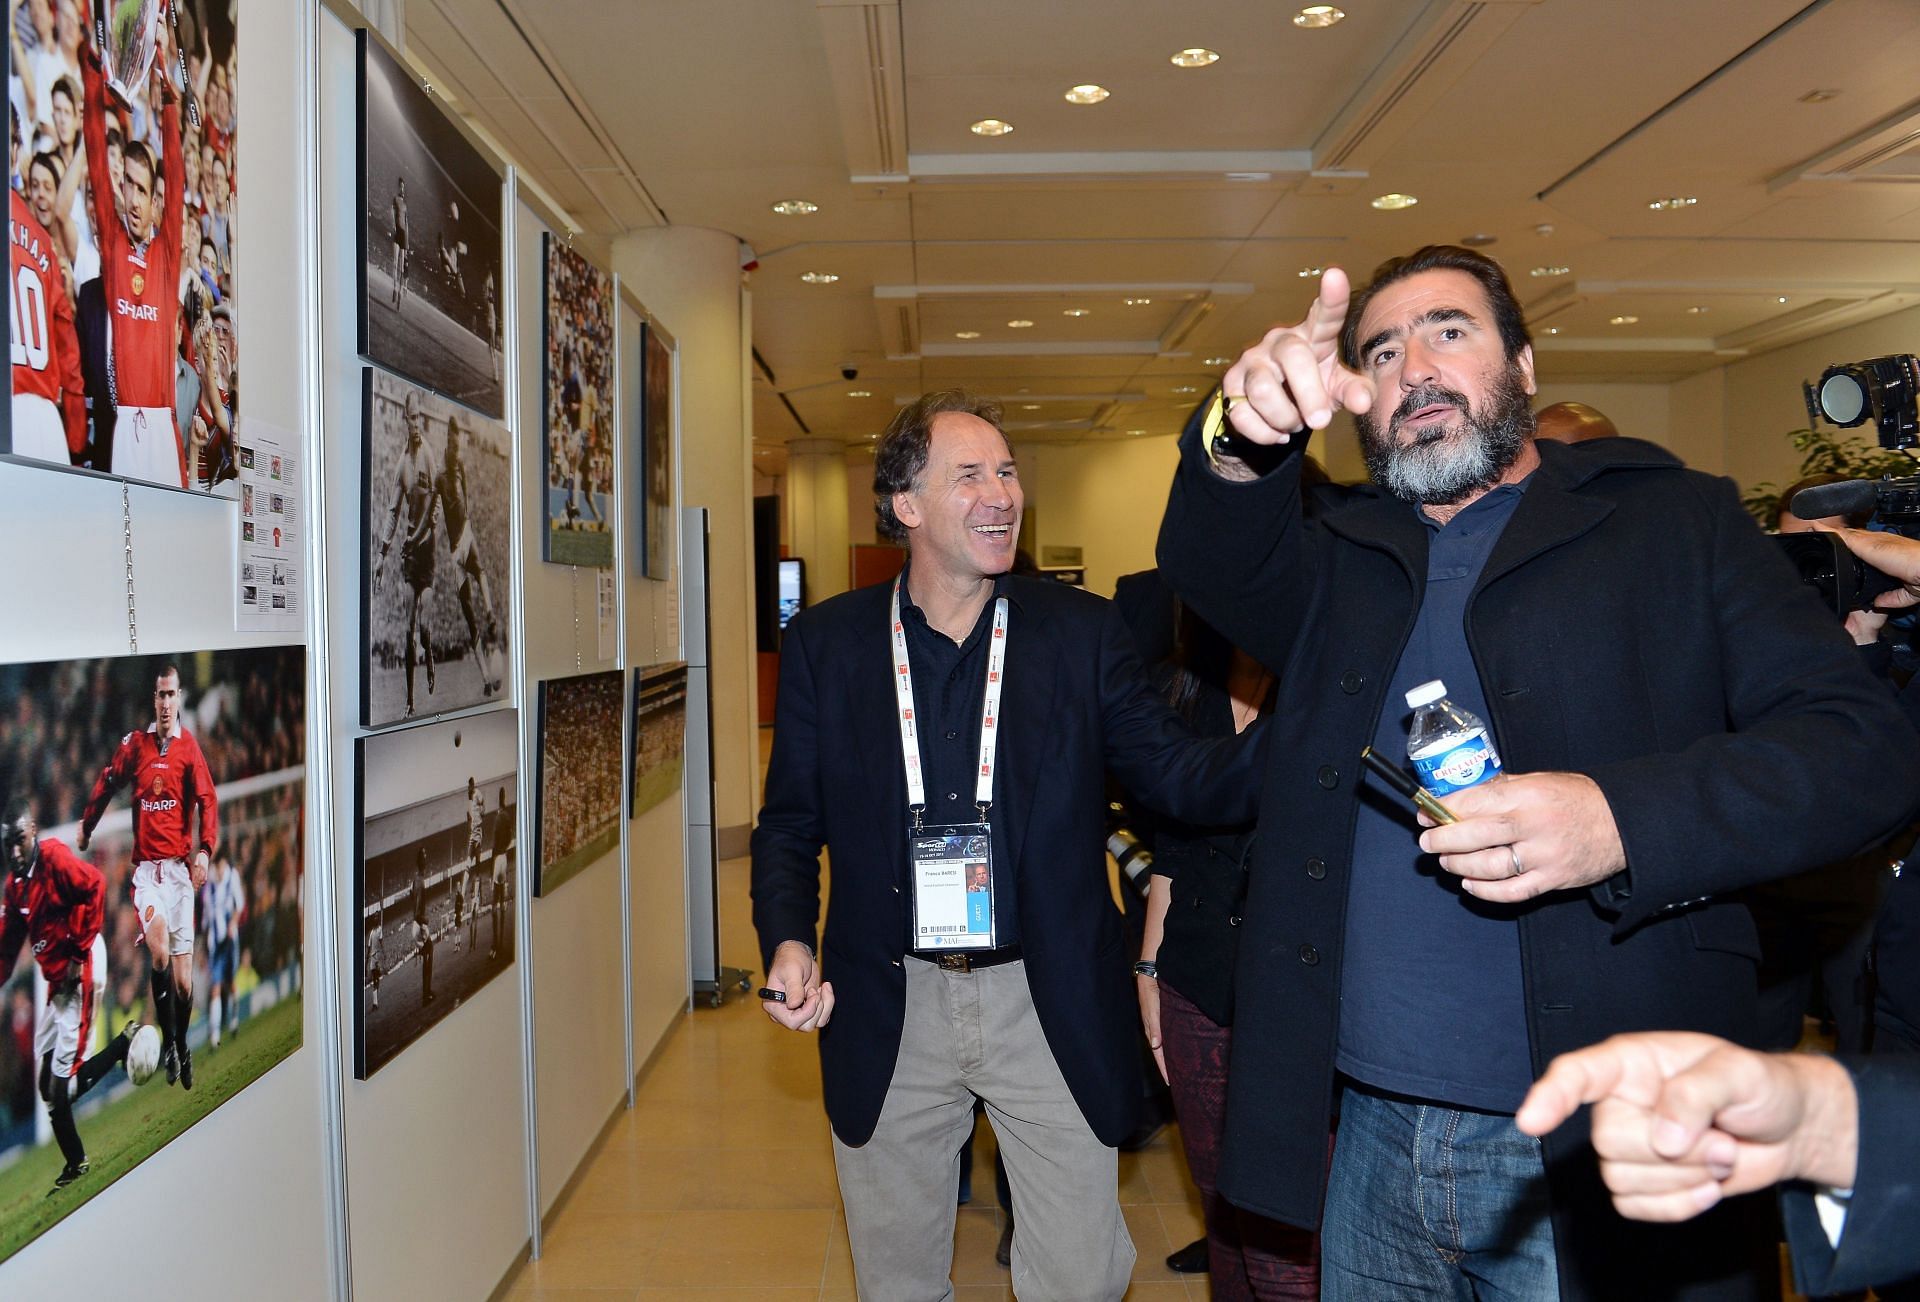 Former football players Franco Baresi (L) and Eric Cantona visit the Golden Foot 2012 photo exhibition at Grimaldi Forum on October 17, 2012 in Monte-Carlo, Monaco.